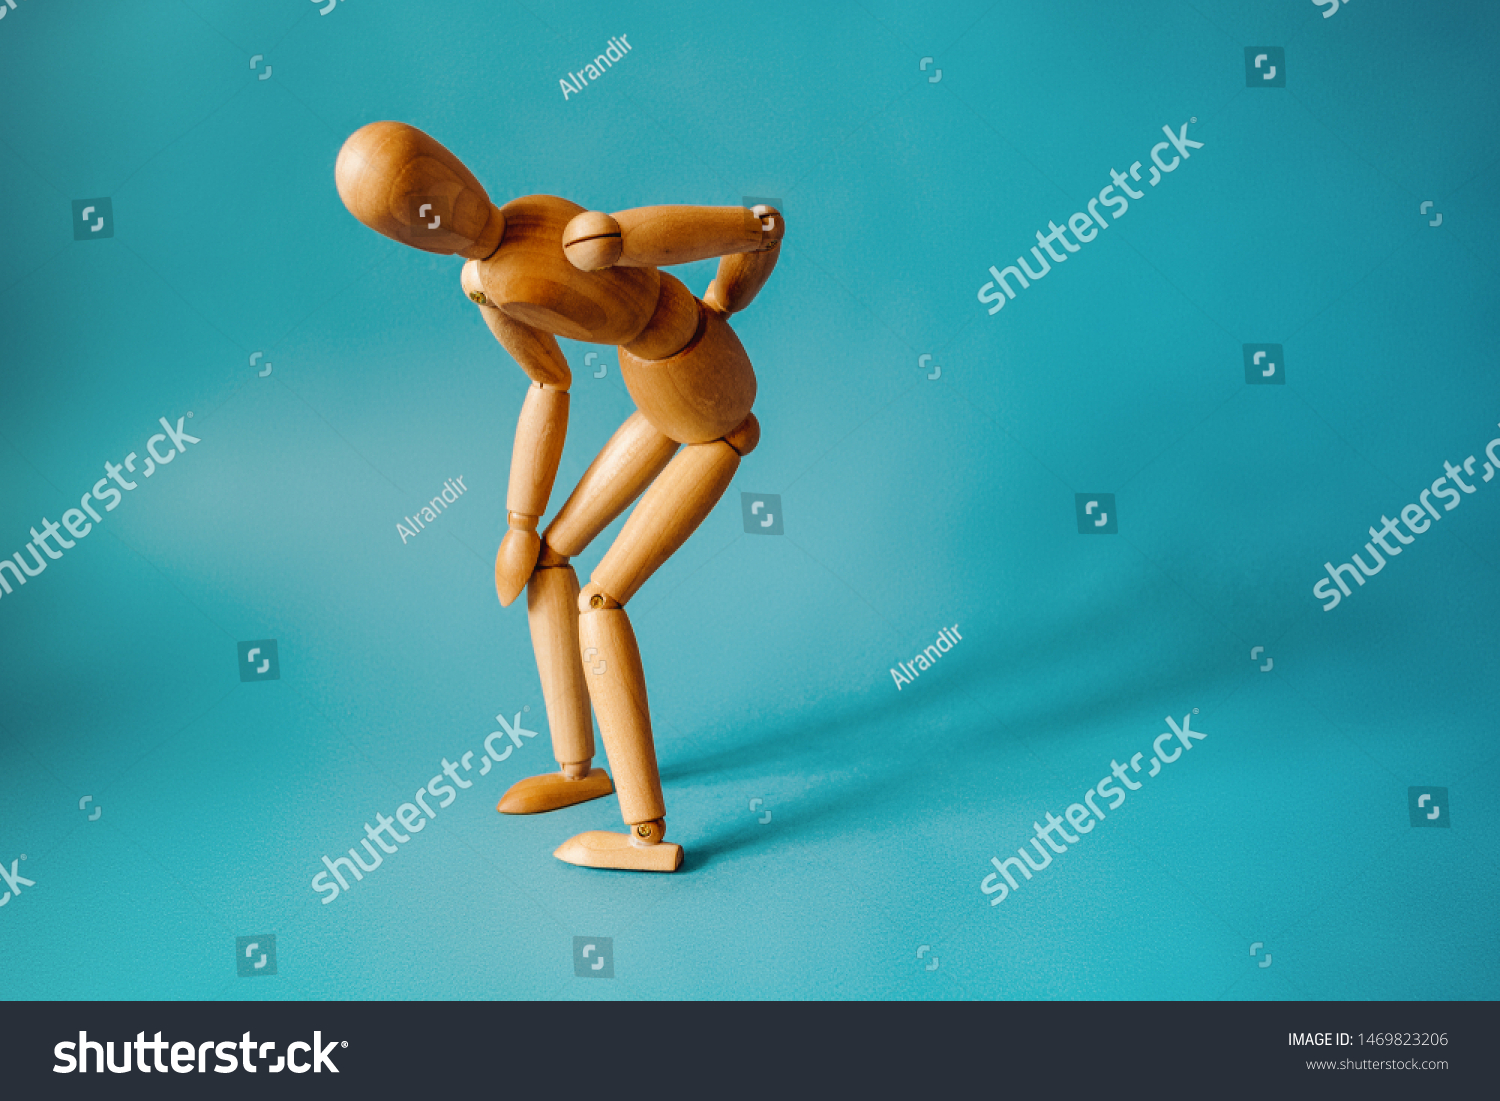 Concept of back pain. A wooden figure depicts a pain in the back. #1469823206